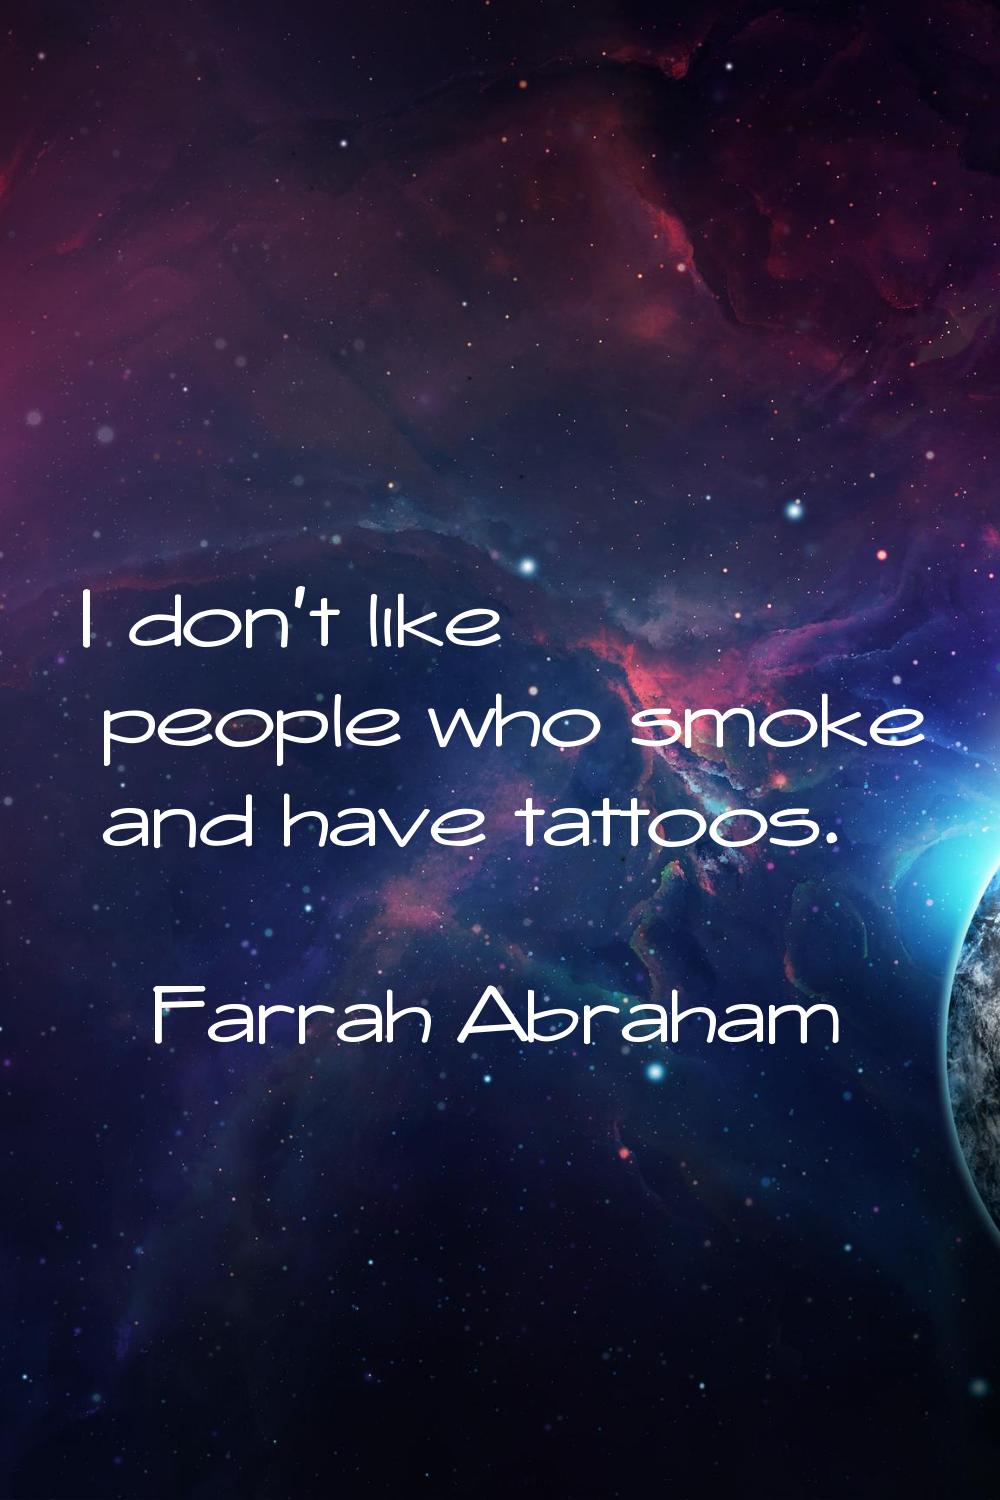 I don't like people who smoke and have tattoos.